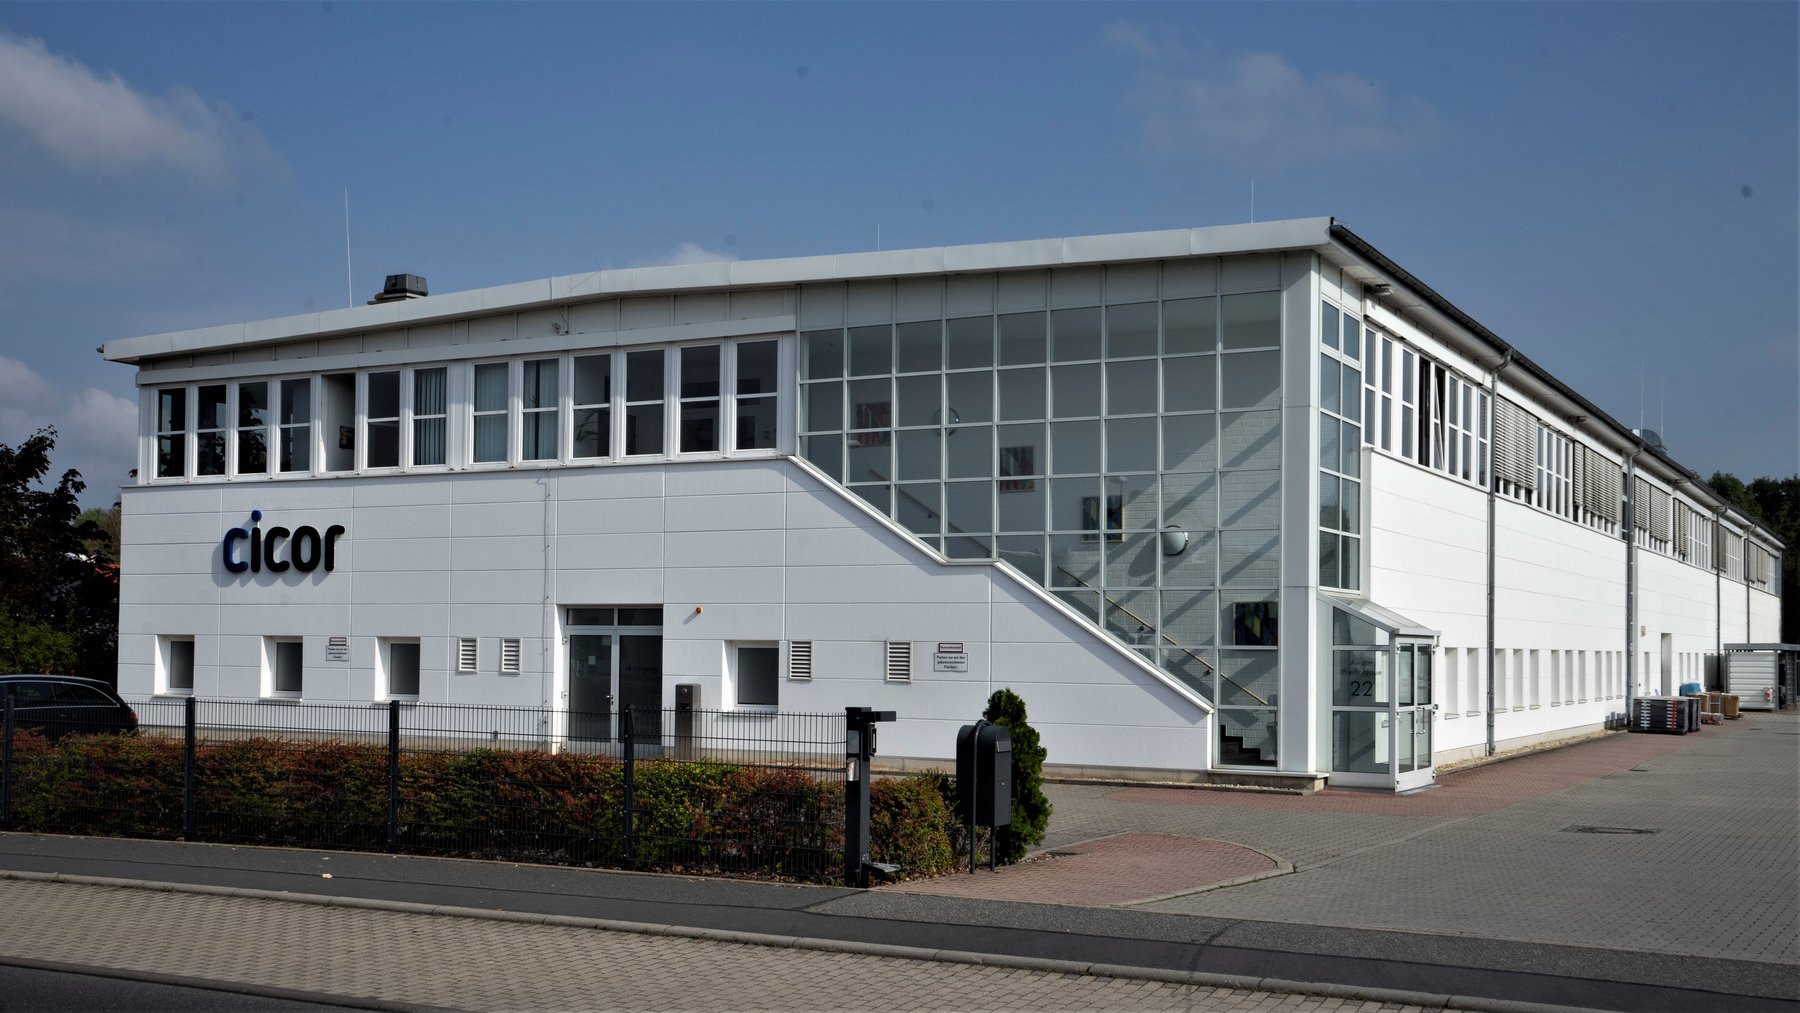 Cicor production site in Dresden Germany